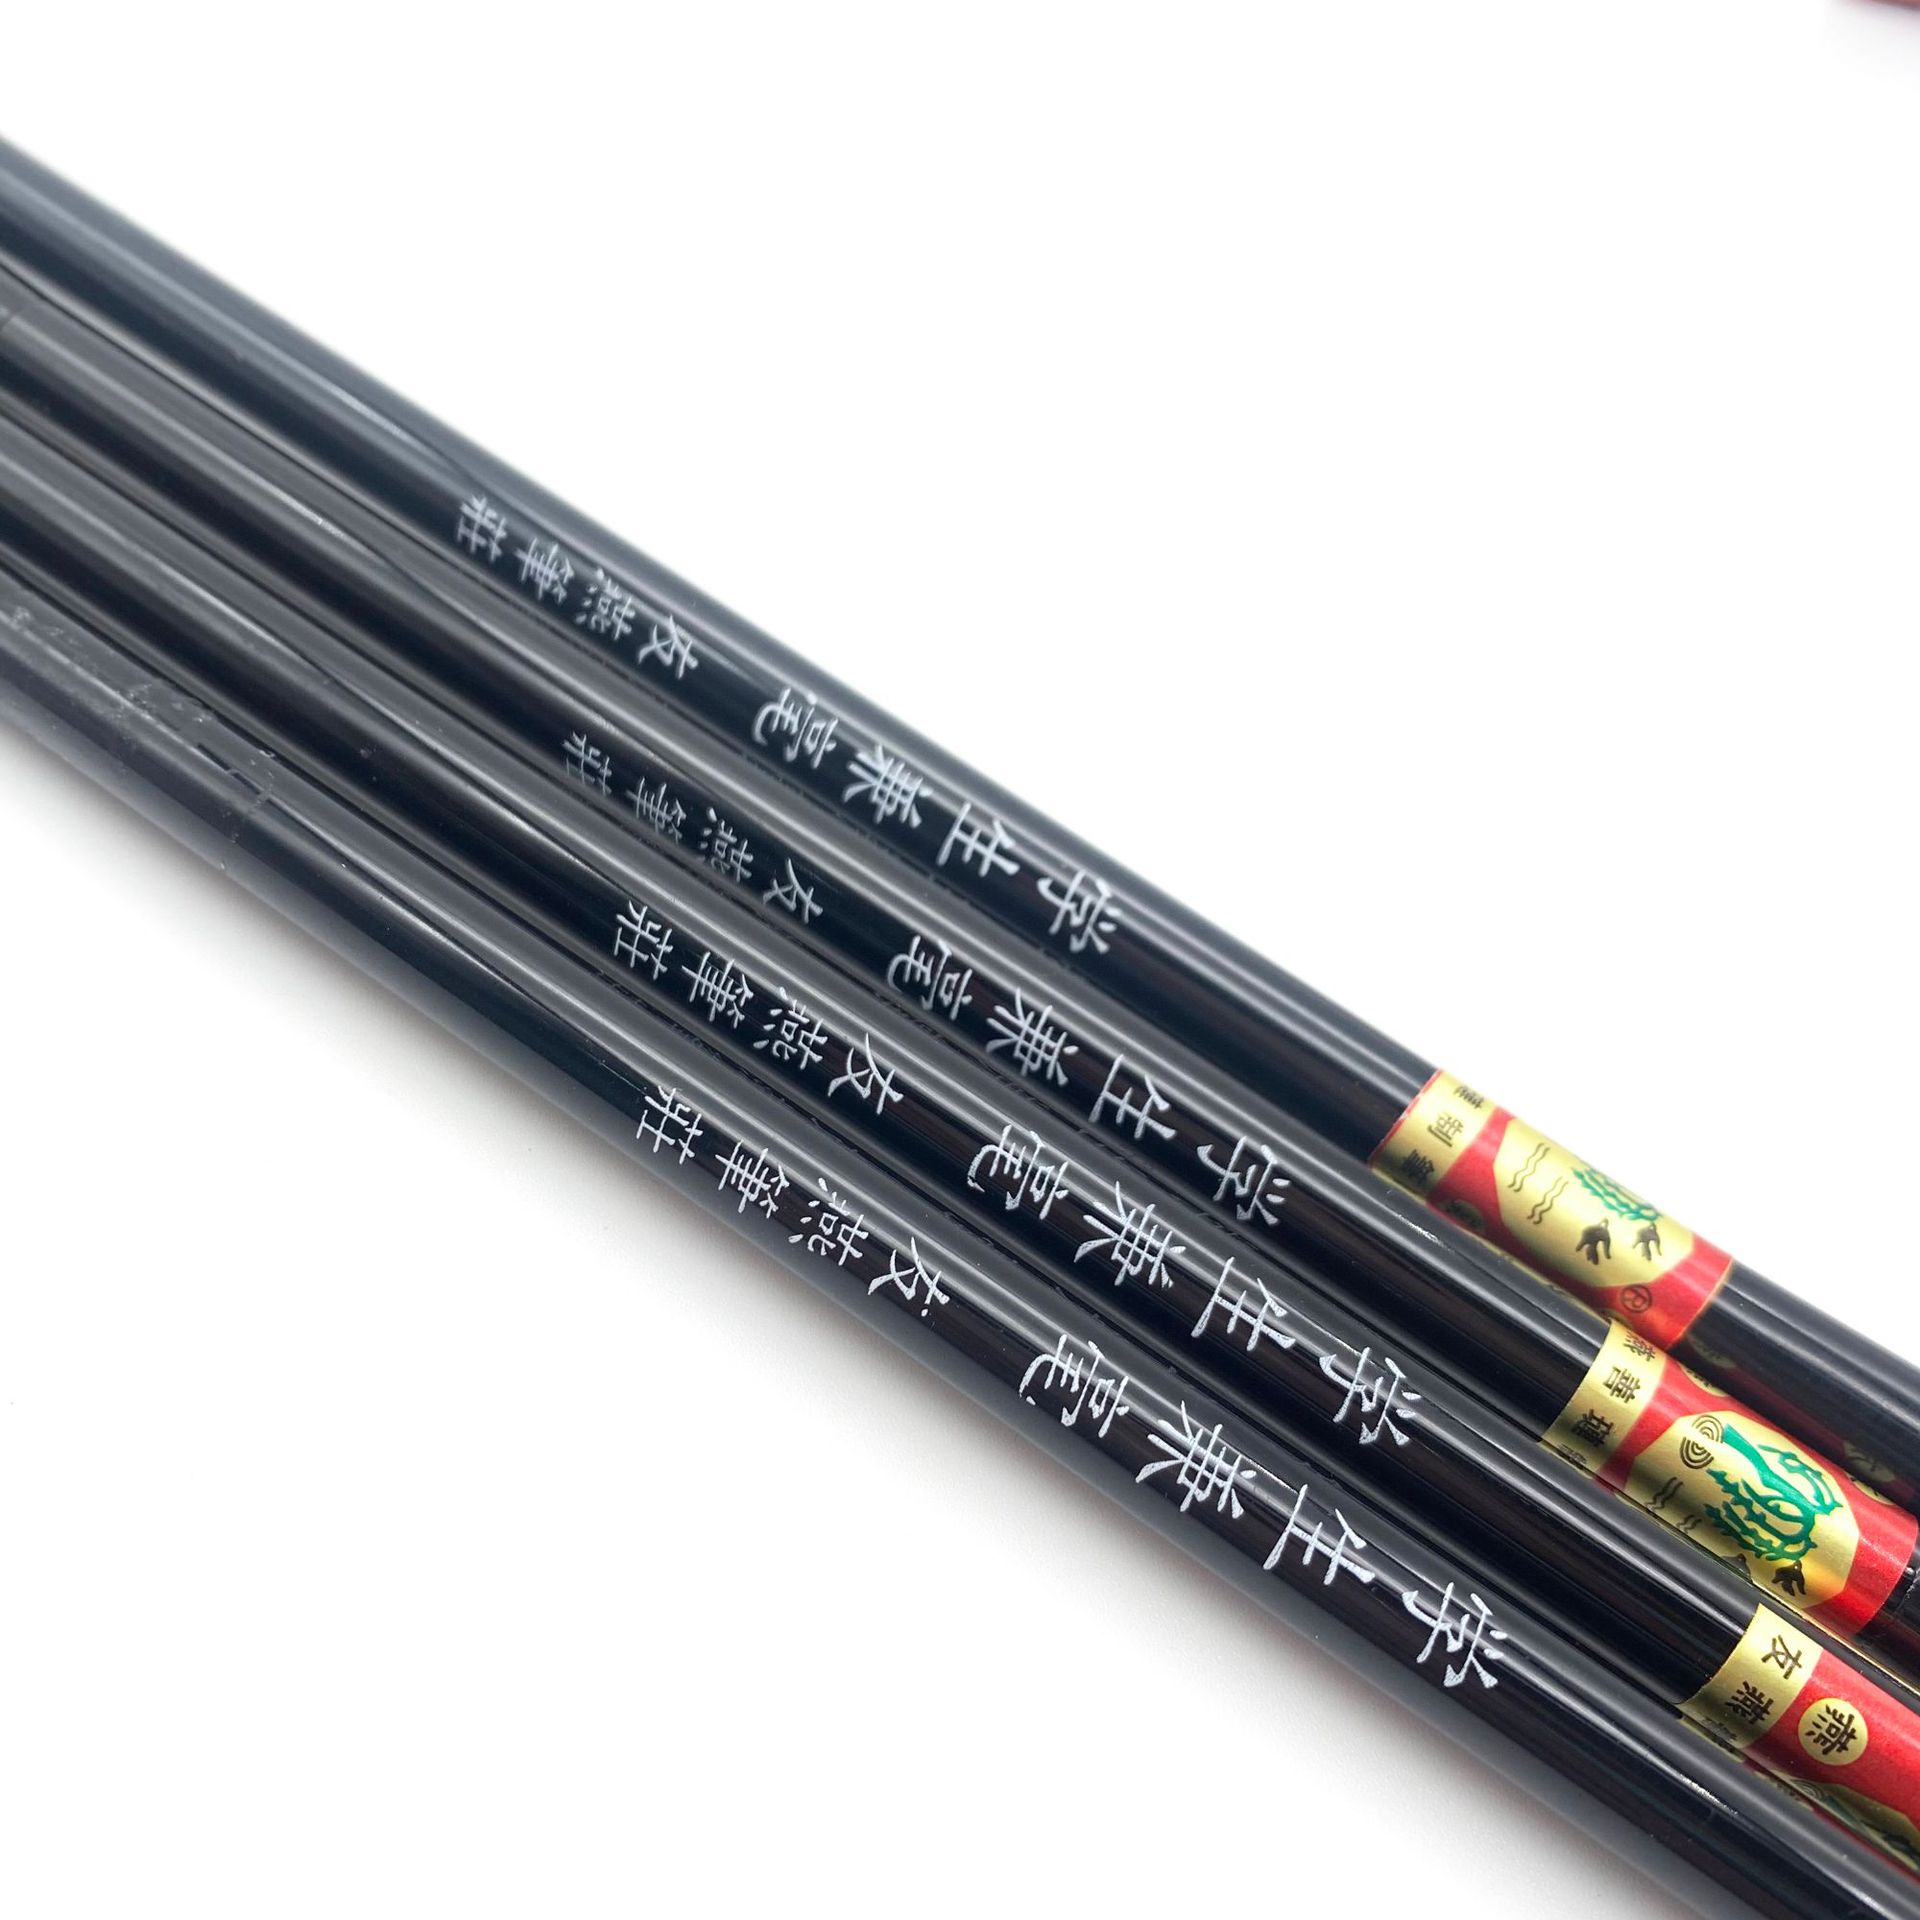 Doubled Both Writing Brush Wholesale Black Aluminum Rod Regular Script in Small Characters Writing Brush Mixed Hair Writing Brush Made of Goat's Hair Calligraphy Supplies Set Wholesale